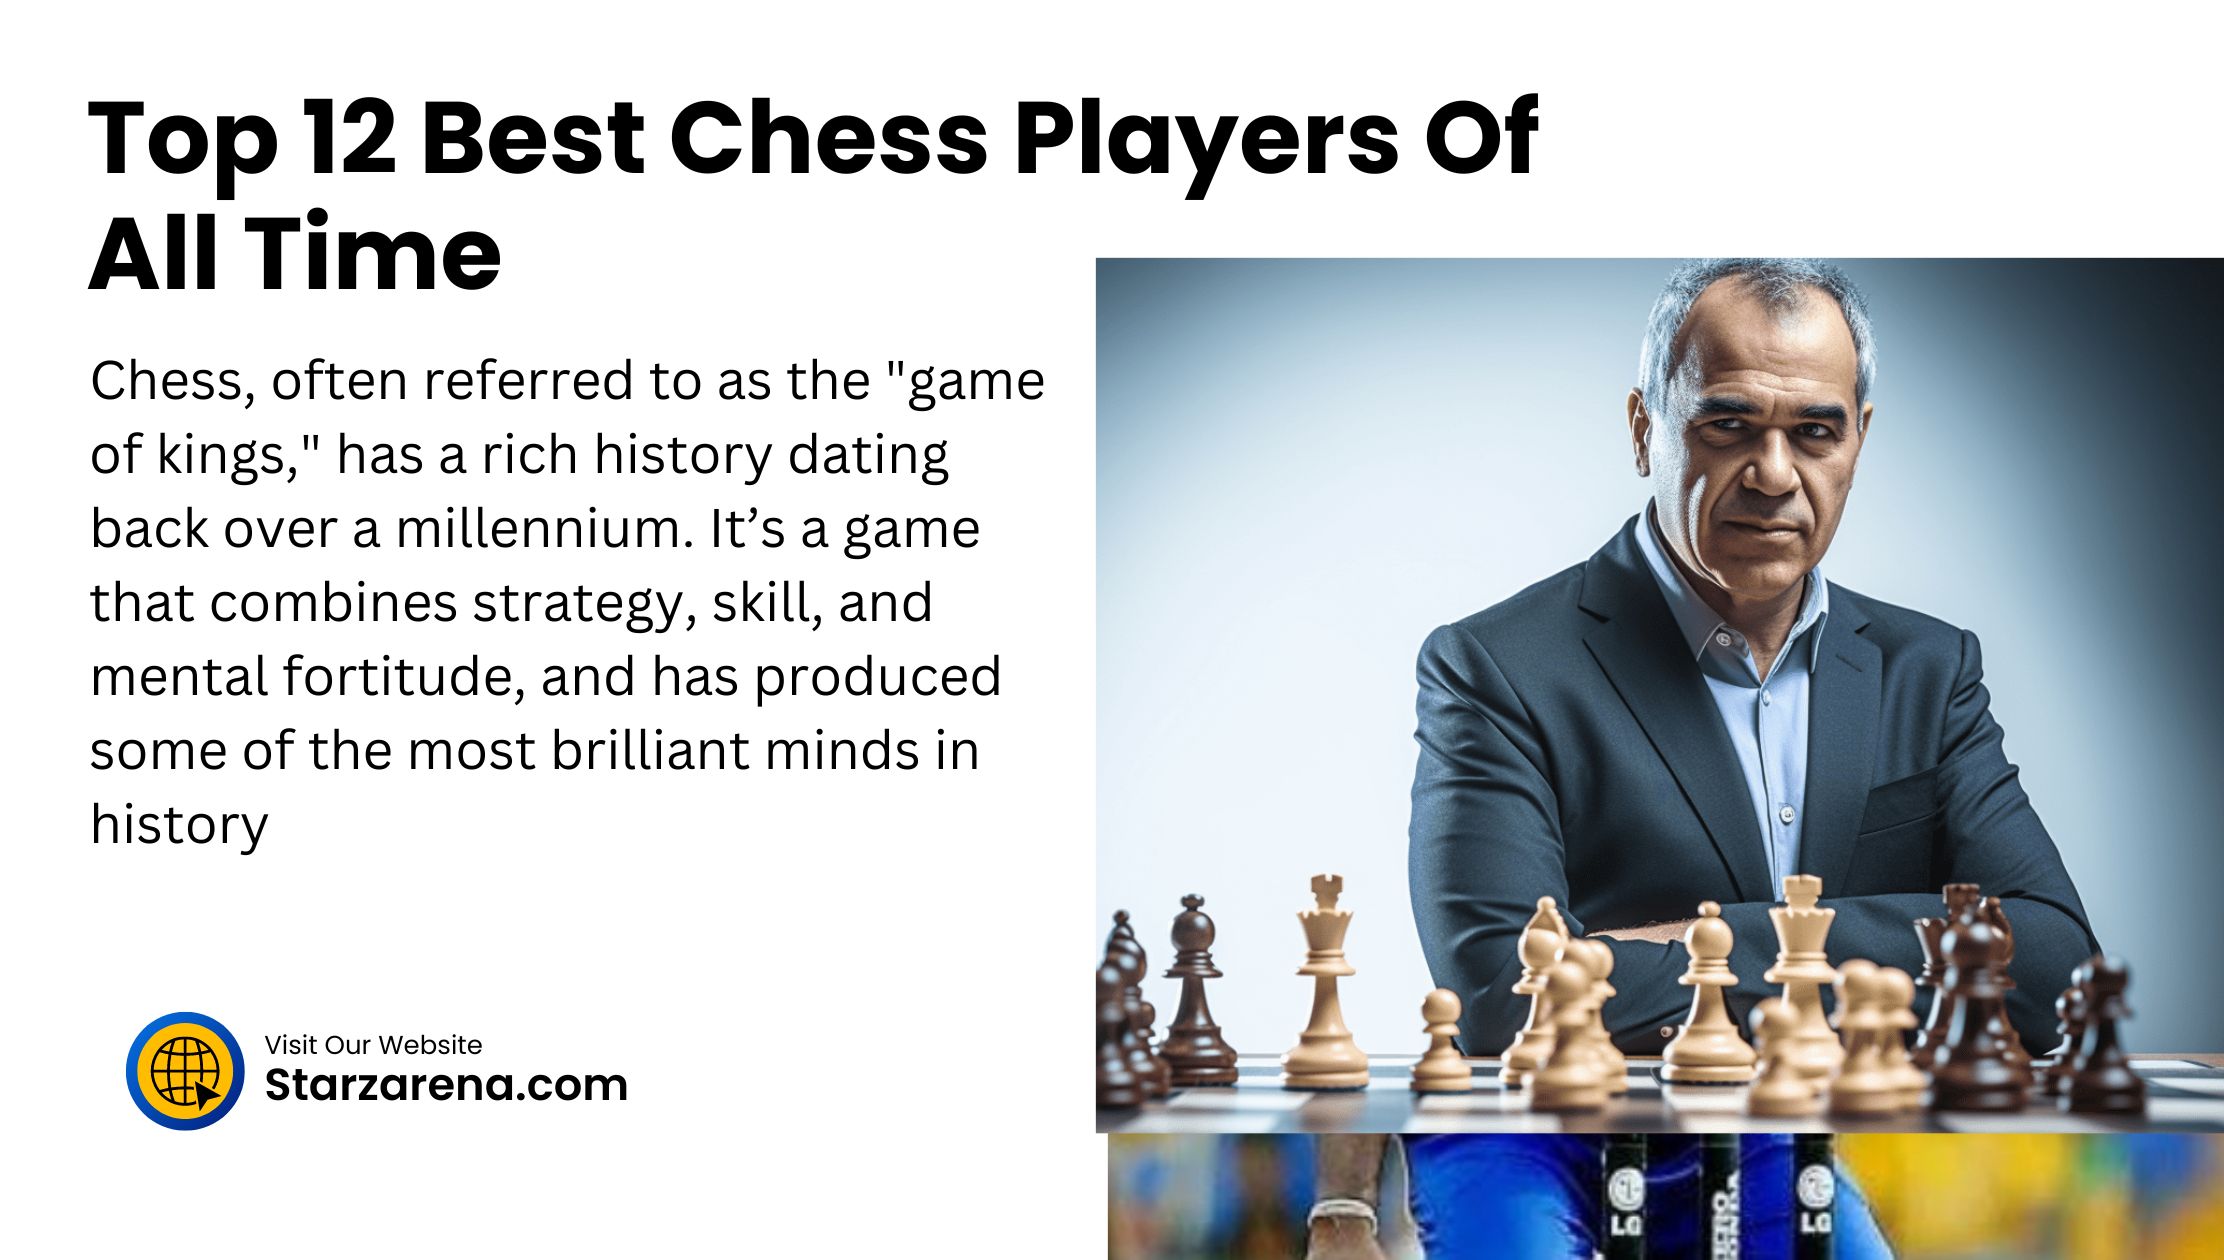 Top 12 Best Chess Players Of All Time